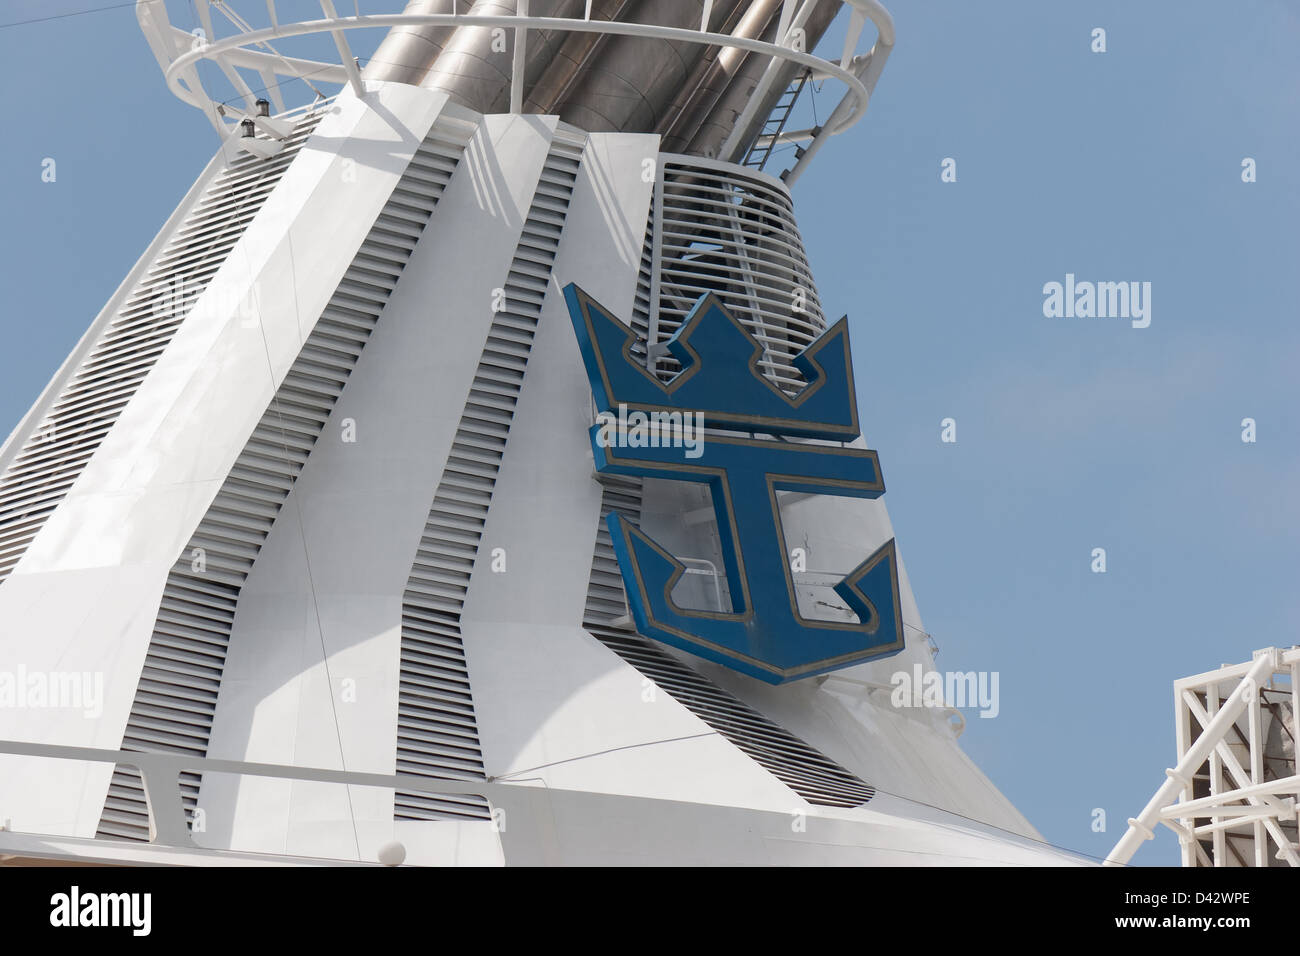 The Royal Caribean logo on the 'Grandeur of the Seas' funnel. Stock Photo